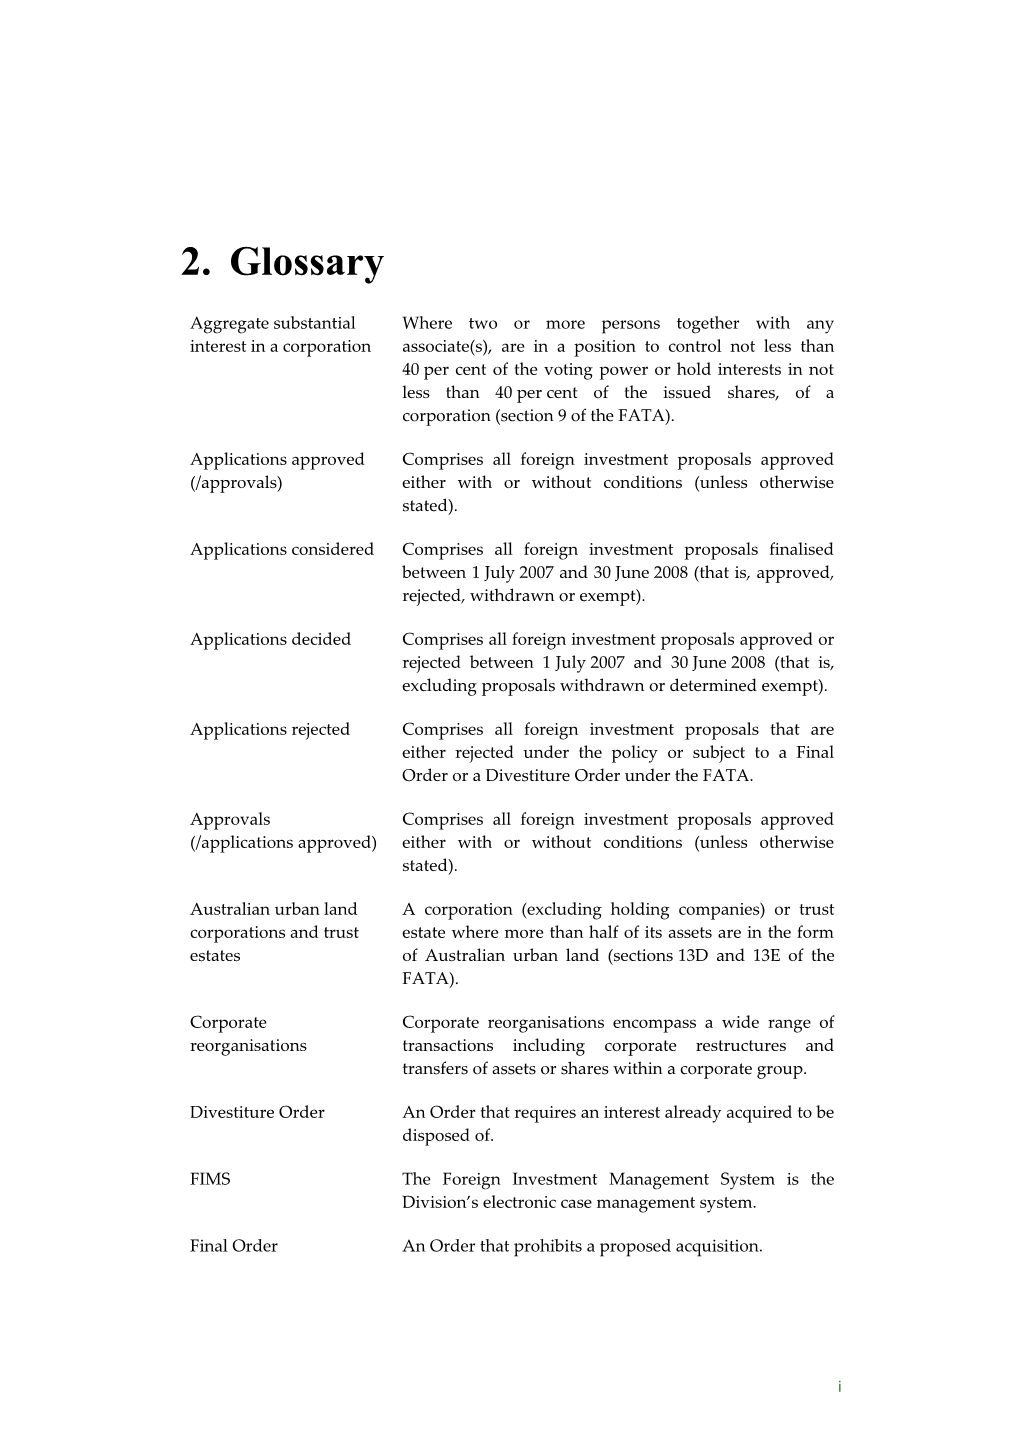 Glossary - FIRB 2007-08 Annual Report